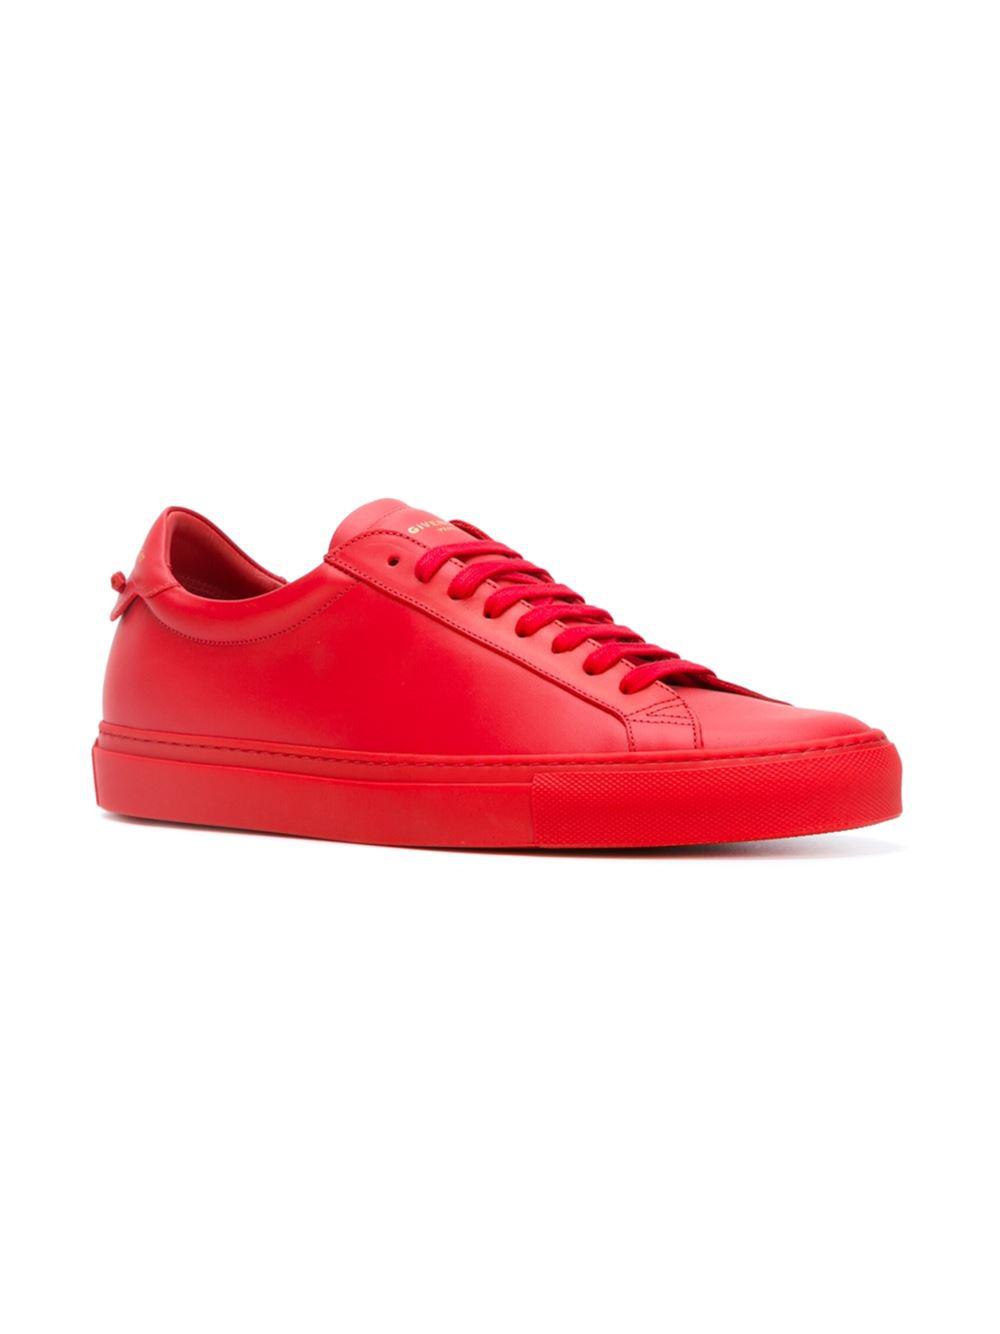 Lyst - Givenchy Classic Low-top Sneakers in Red for Men